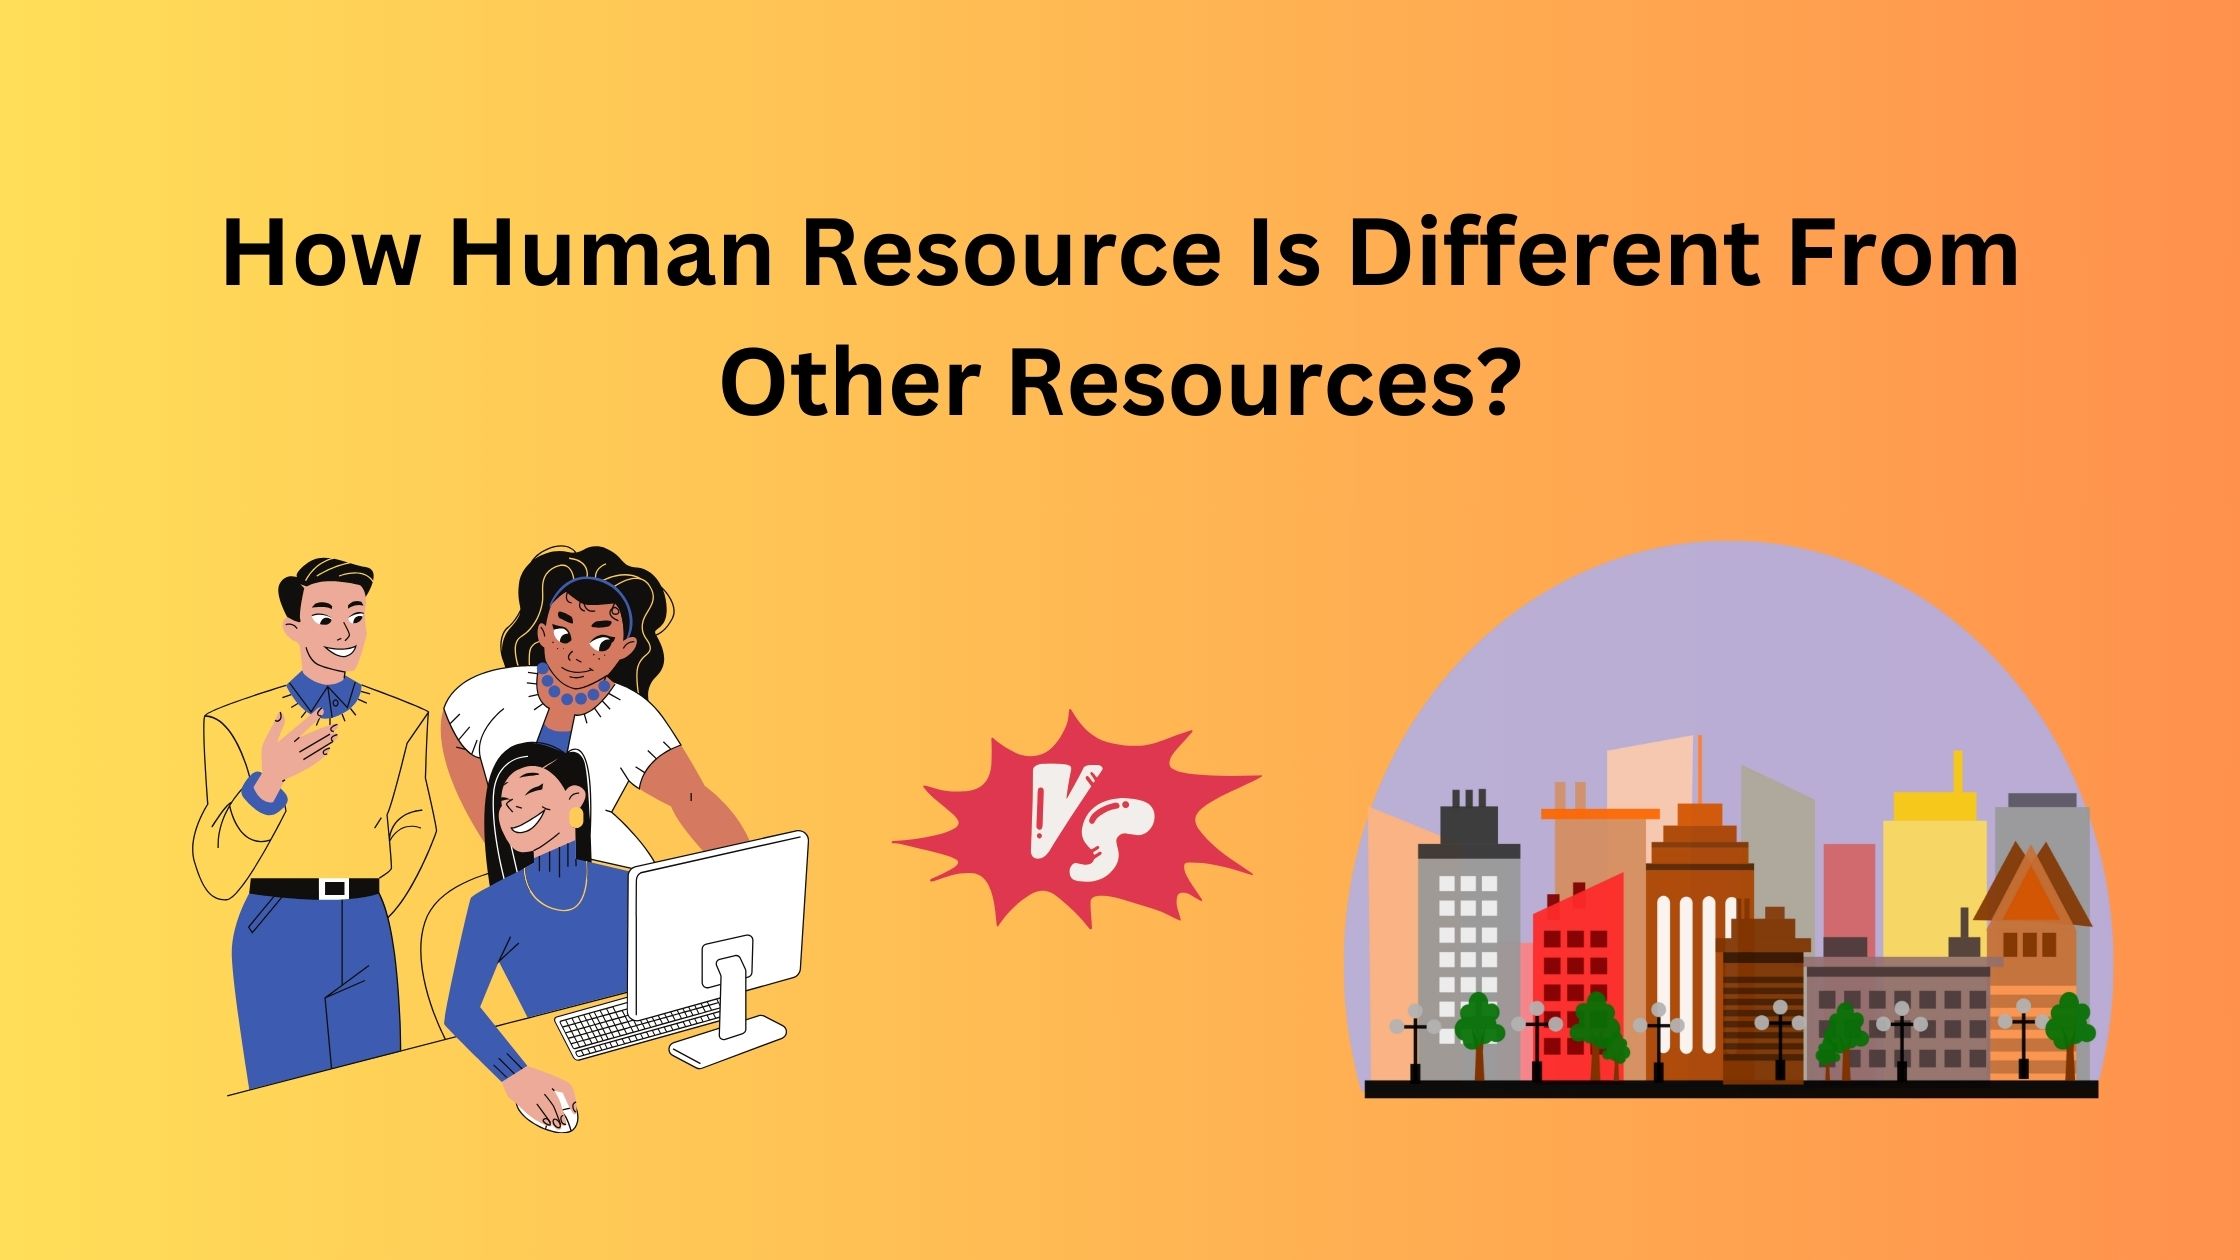 How Human Resource Is Different From Other Resources?